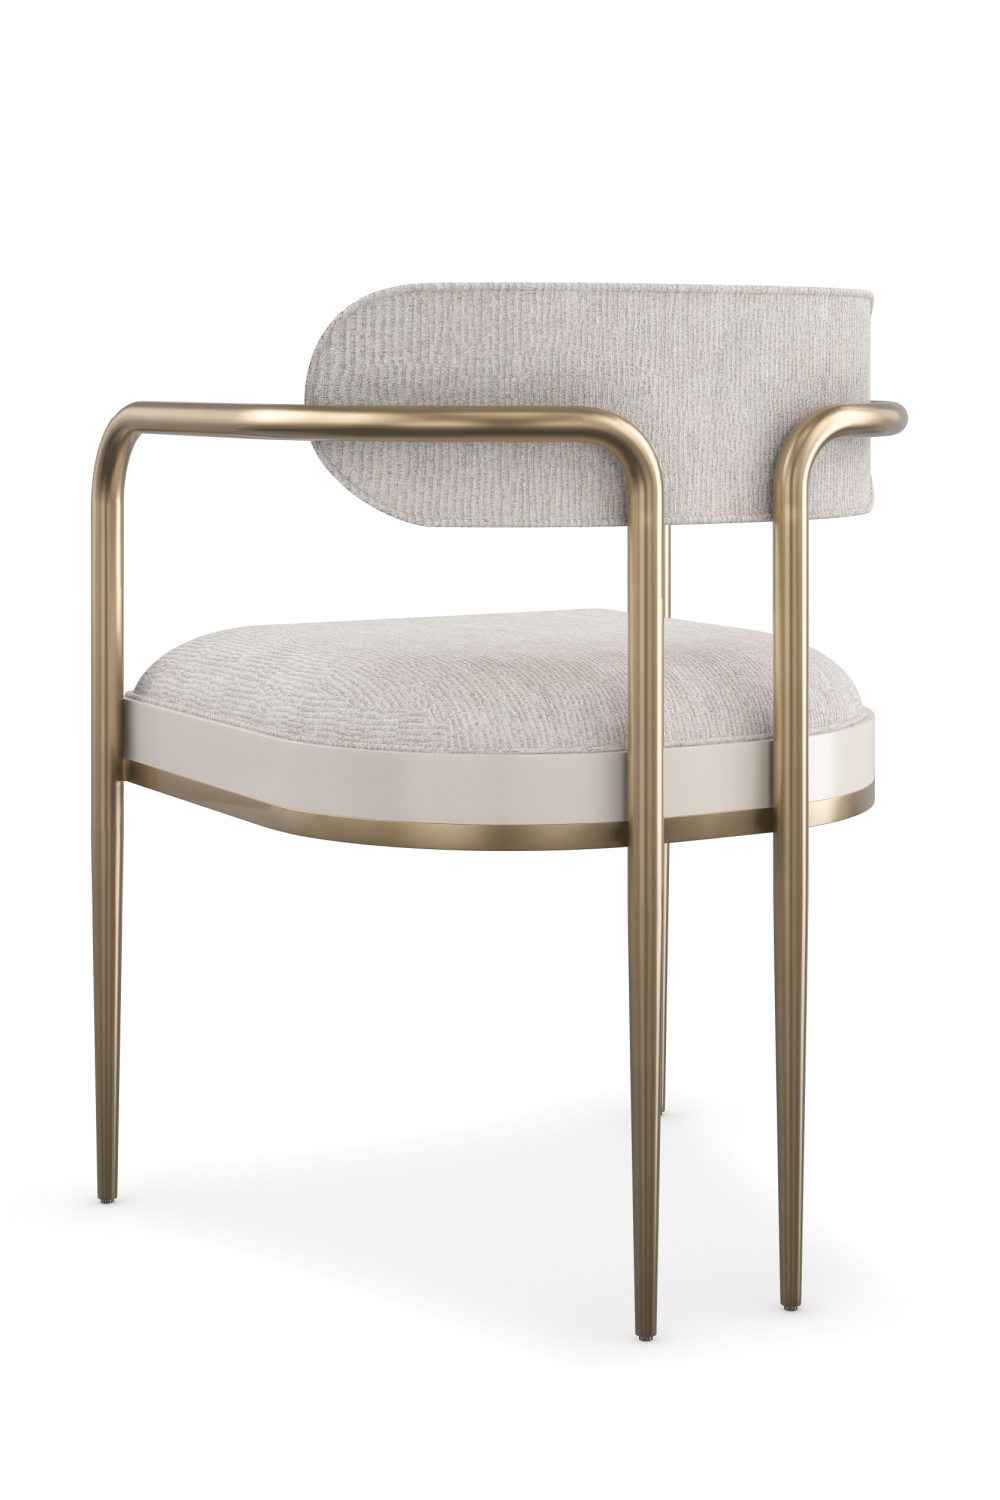 Bronze Framed Dining Chair | Caracole Emphasis | Oroa.com